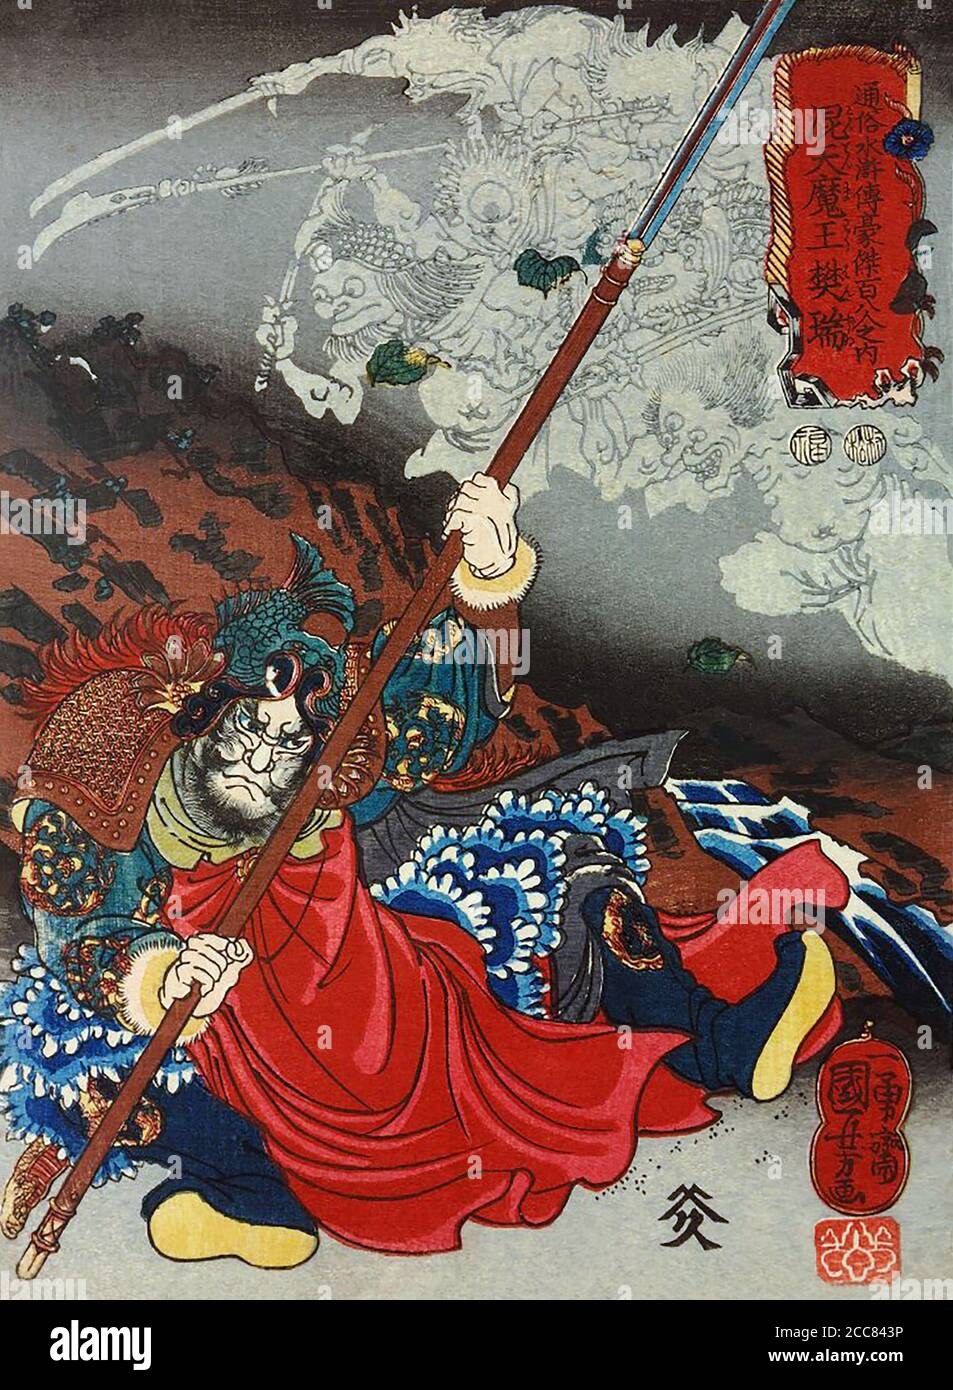 Japan: Konsei Mao or Kotenmao Hazui, one of the 'One Hundred and Eight Heroes of the Water Margin', grasping his spear, falls back before an apparition of demons. Woodblock print by Utagawa Kuniyoshi (1797-1863), 1827-1830. The Water Margin (known in Chinese as Shuihu Zhuan, sometimes abbreviated to Shuihu, known as Suikoden in Japanese, as well as Outlaws of the Marsh, Tale of the Marshes, All Men Are Brothers, Men of the Marshes, or The Marshes of Mount Liang in English, is a 14th century novel and one of the Four Great Classical Novels of Chinese literature. Attributed to Shi Nai'an and wri Stock Photo